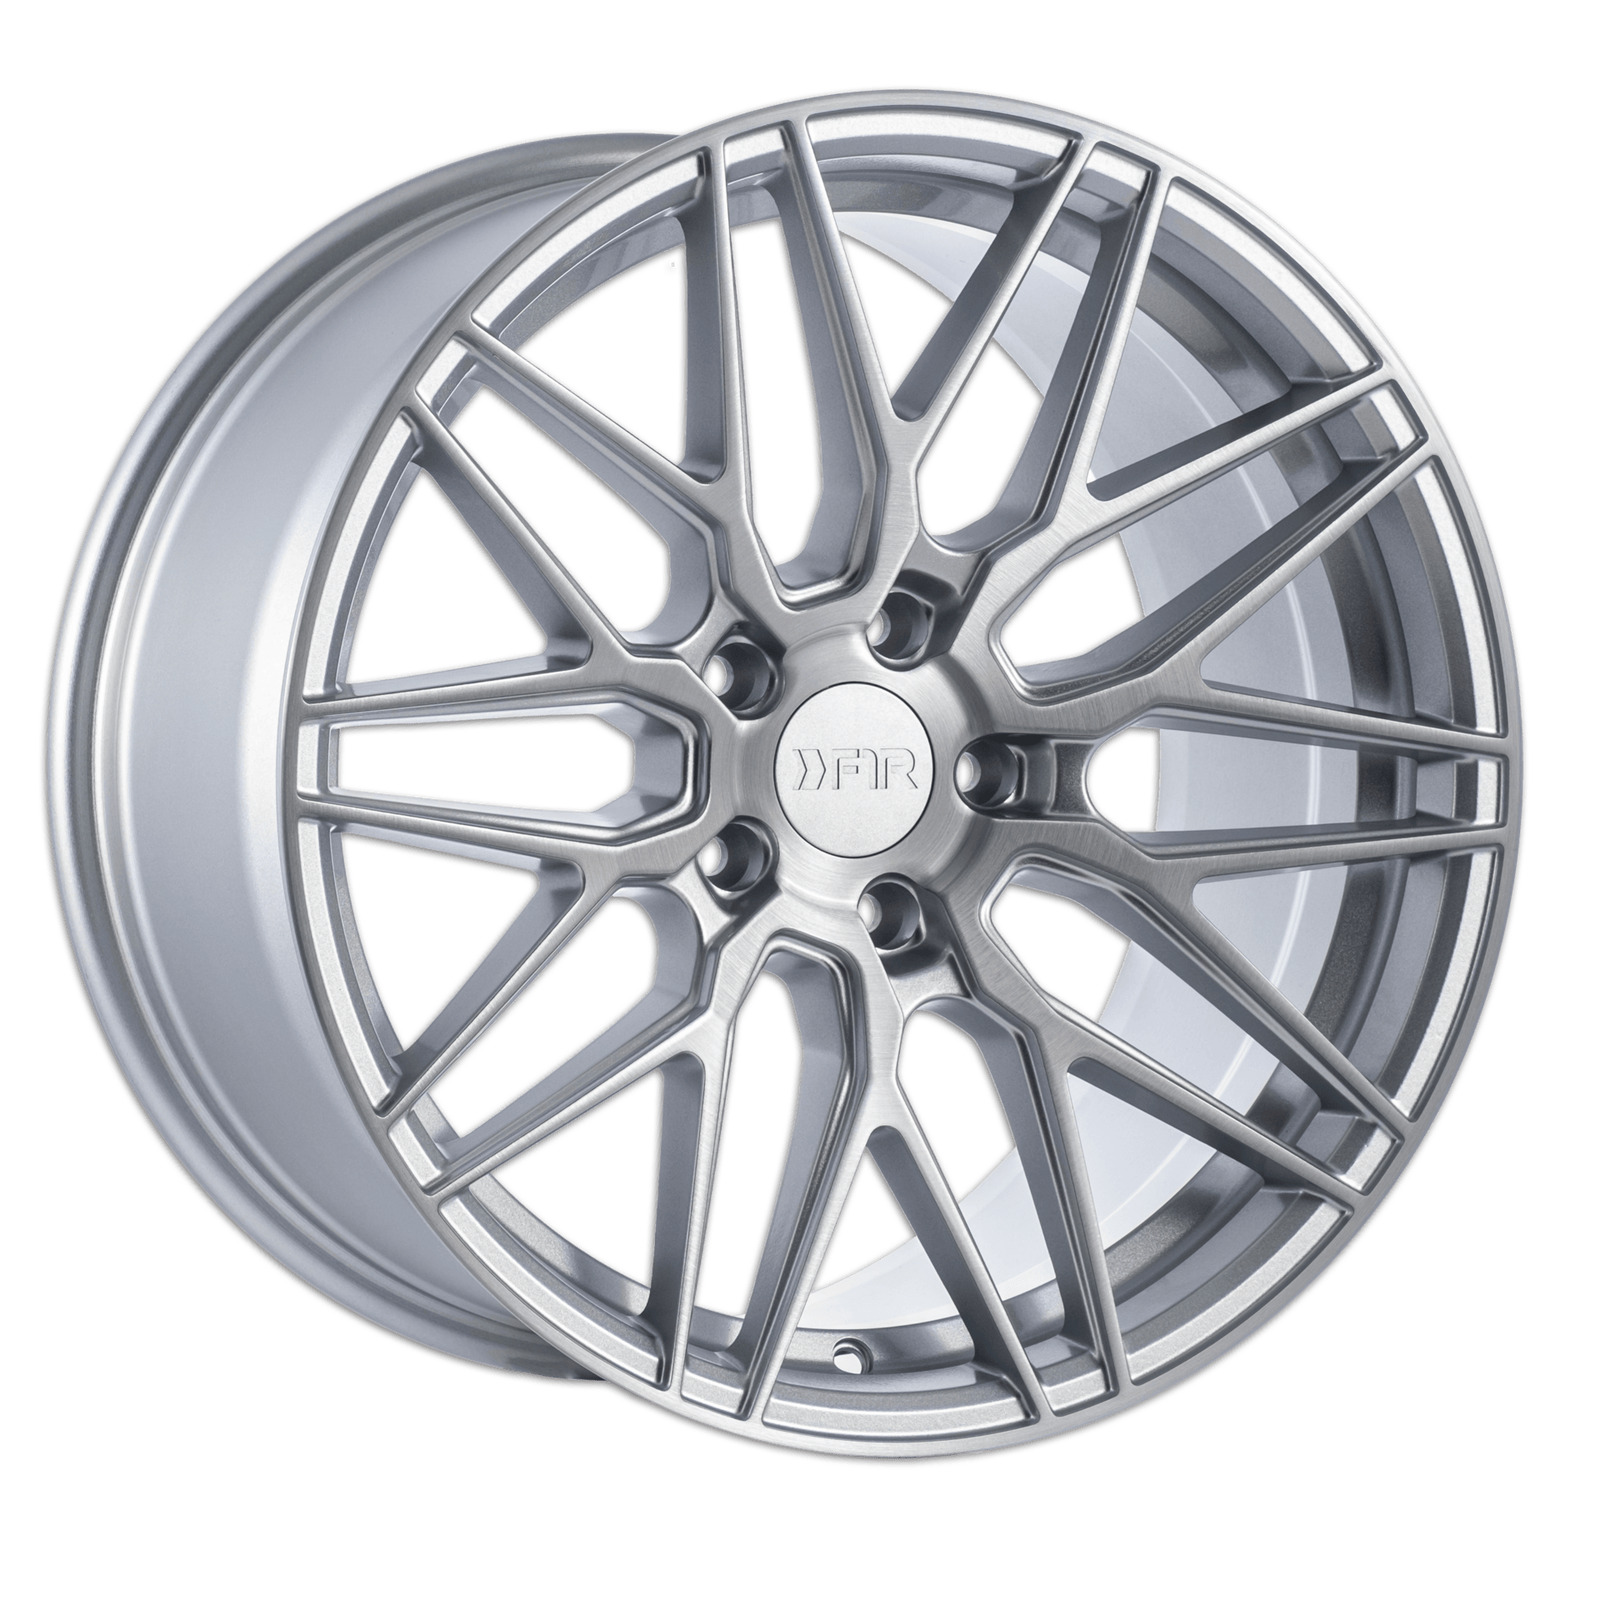 F1R F103 17x8.5, 5x100/114.3, +38ET, Brushed Silver